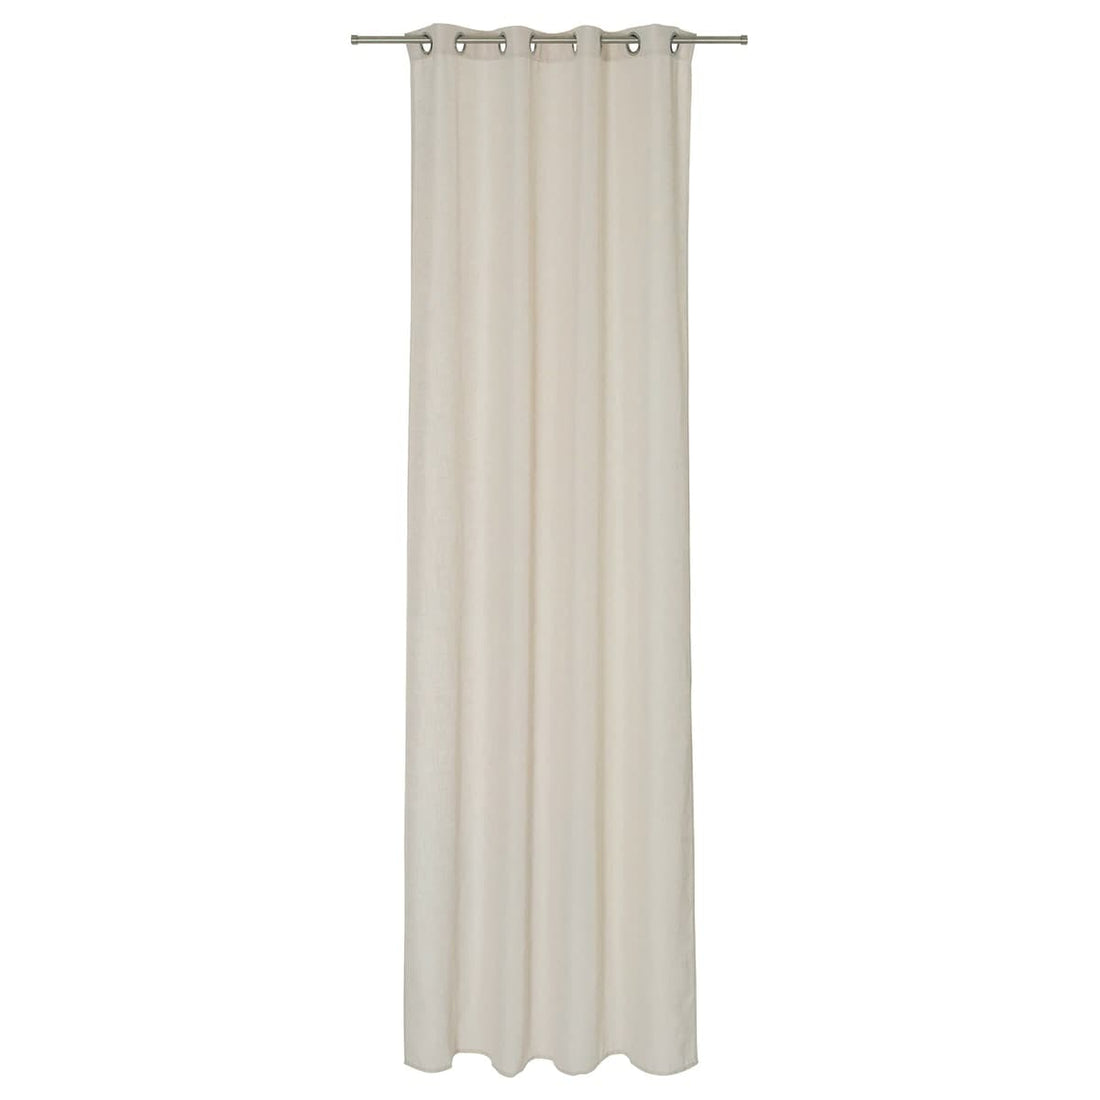 INFINI ECRU OPAQUE CURTAIN 140X280 CM WITH EYELETS - best price from Maltashopper.com BR480008021